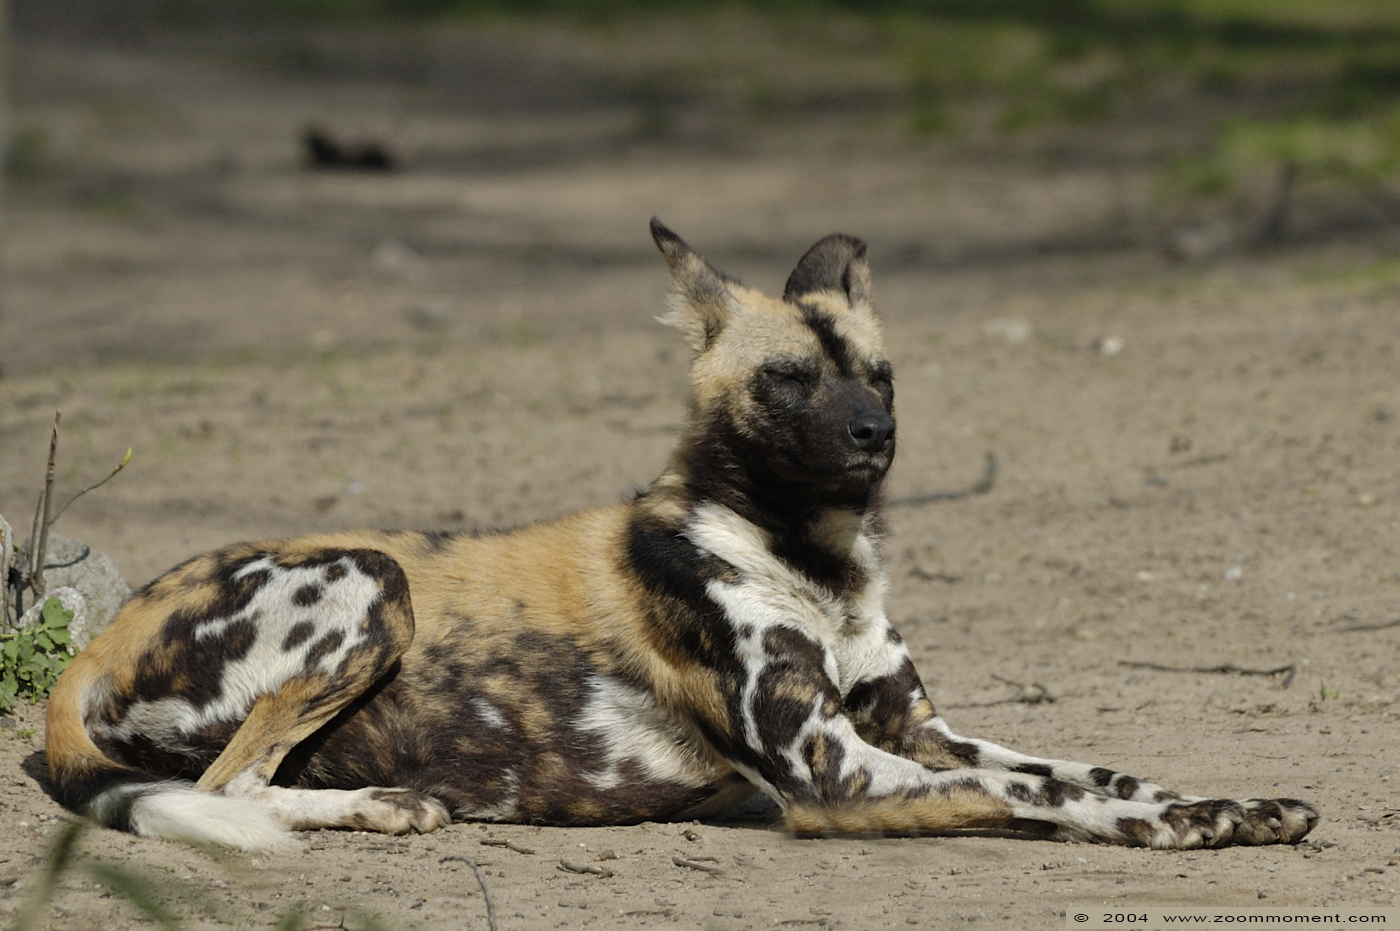 Afrikaanse wilde hond  ( Lycaon pictus )  African wild dog
Palavras chave: Zoo Duisburg Lycaon pictus Afrikaanse wilde hond African wild dog